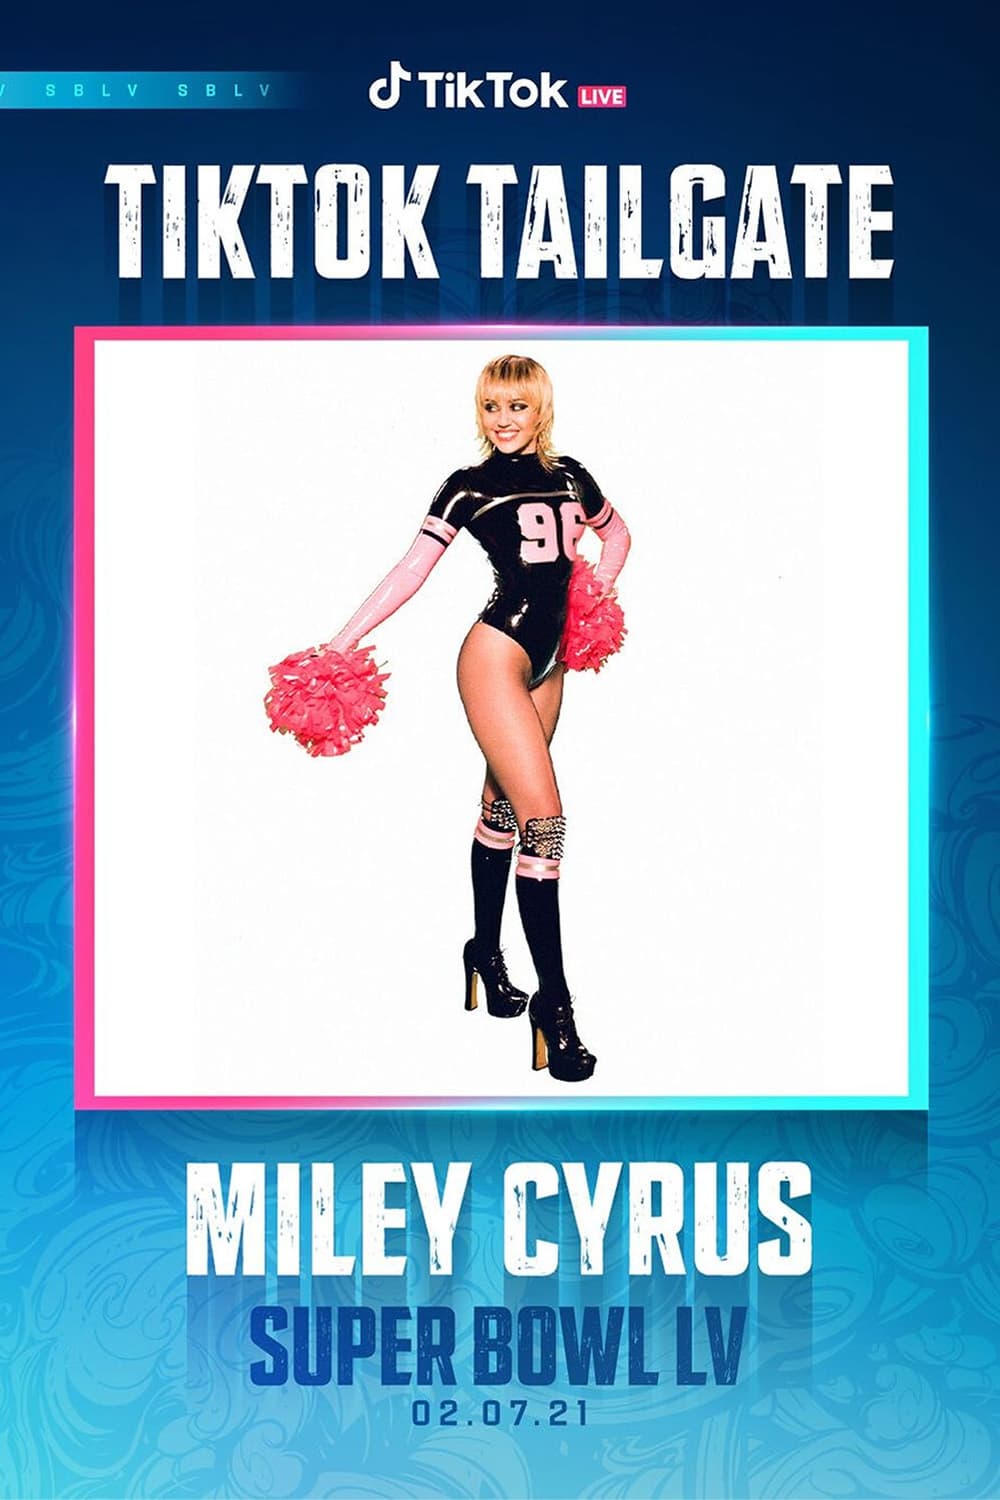 The Super Bowl LIV TikTok Tailgate with Miley Cyrus